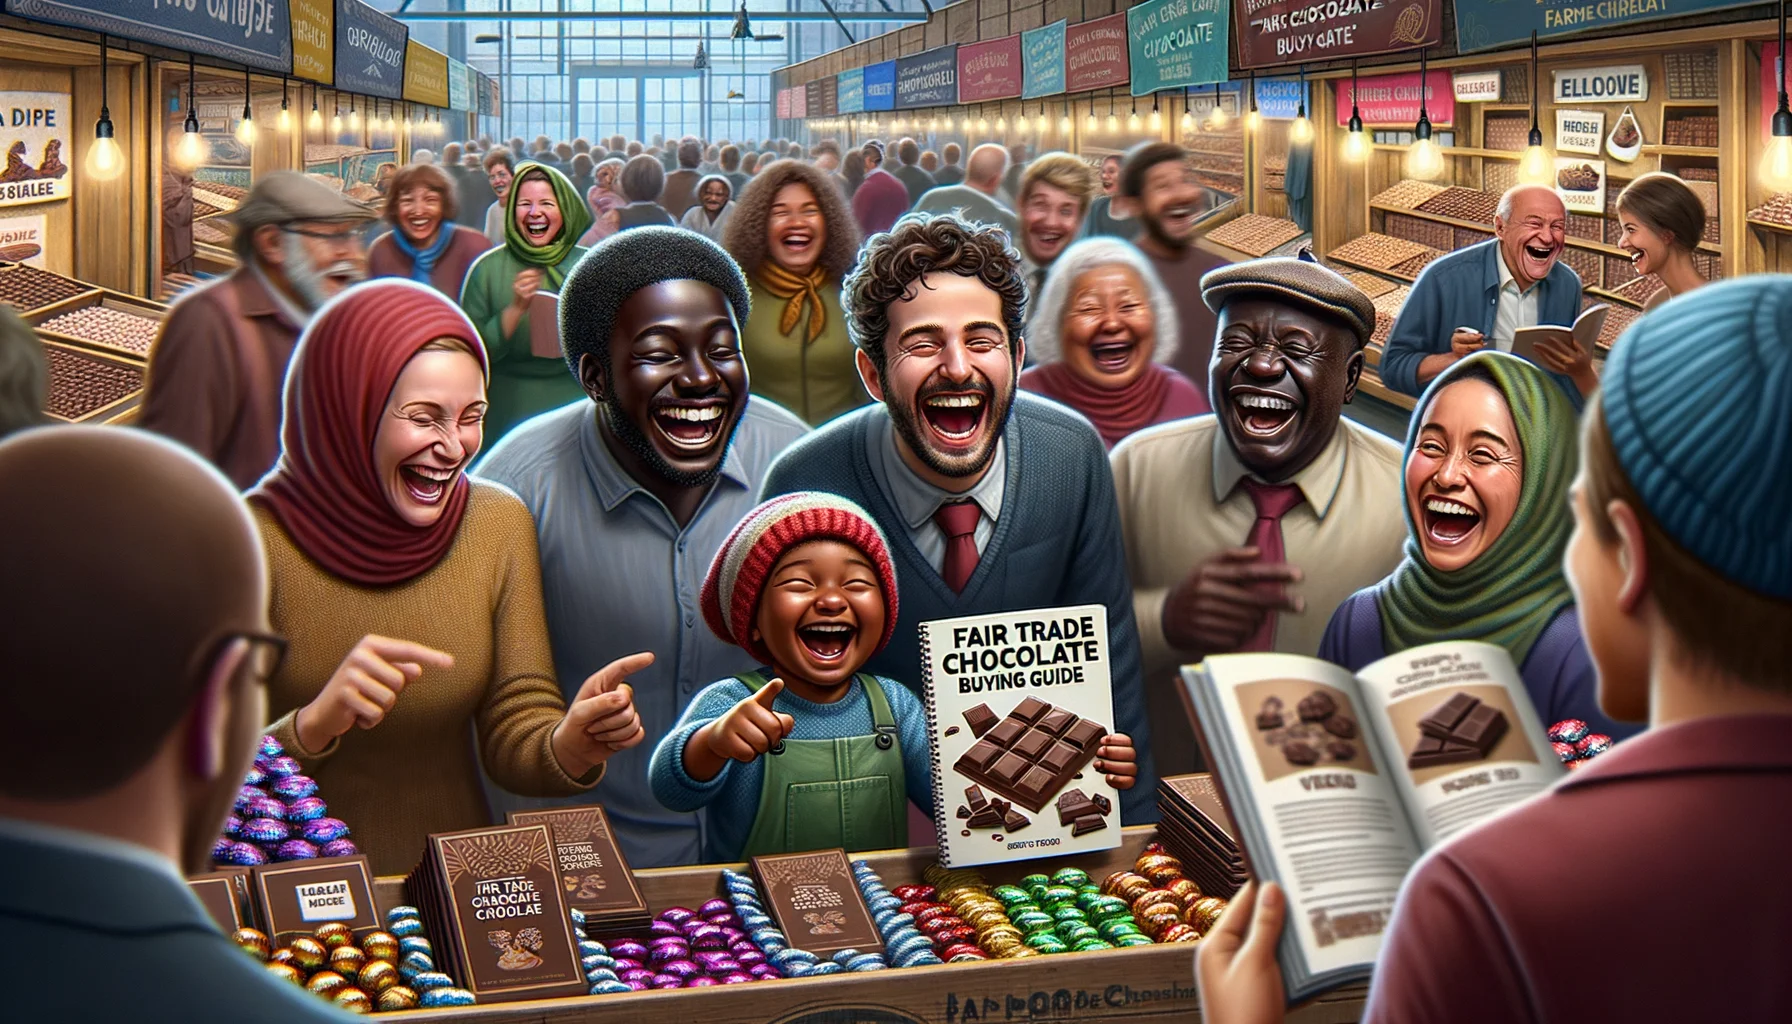 Create a humorous and realistic image showcasing 'Fair Trade Chocolate Buying Guide'. In this perfect scenario, let's have a bustling chocolate market scene. In the foreground, show a multi-ethnic group of customers - a Black woman, a Hispanic man, and a Middle-Eastern child - blurred slightly with laughter etched on their faces. Each of them is holding a copy of the 'Fair Trade Chocolate Buying Guide'. Perhaps, the child is excitedly pointing at a picture within the guide, making the adults laugh. In the background, have various stands selling chocolates. Each stand has banners promoting fair trade chocolate practices and friendly, cheerful vendors of diverse genders and descents making a lively and engaging scene.